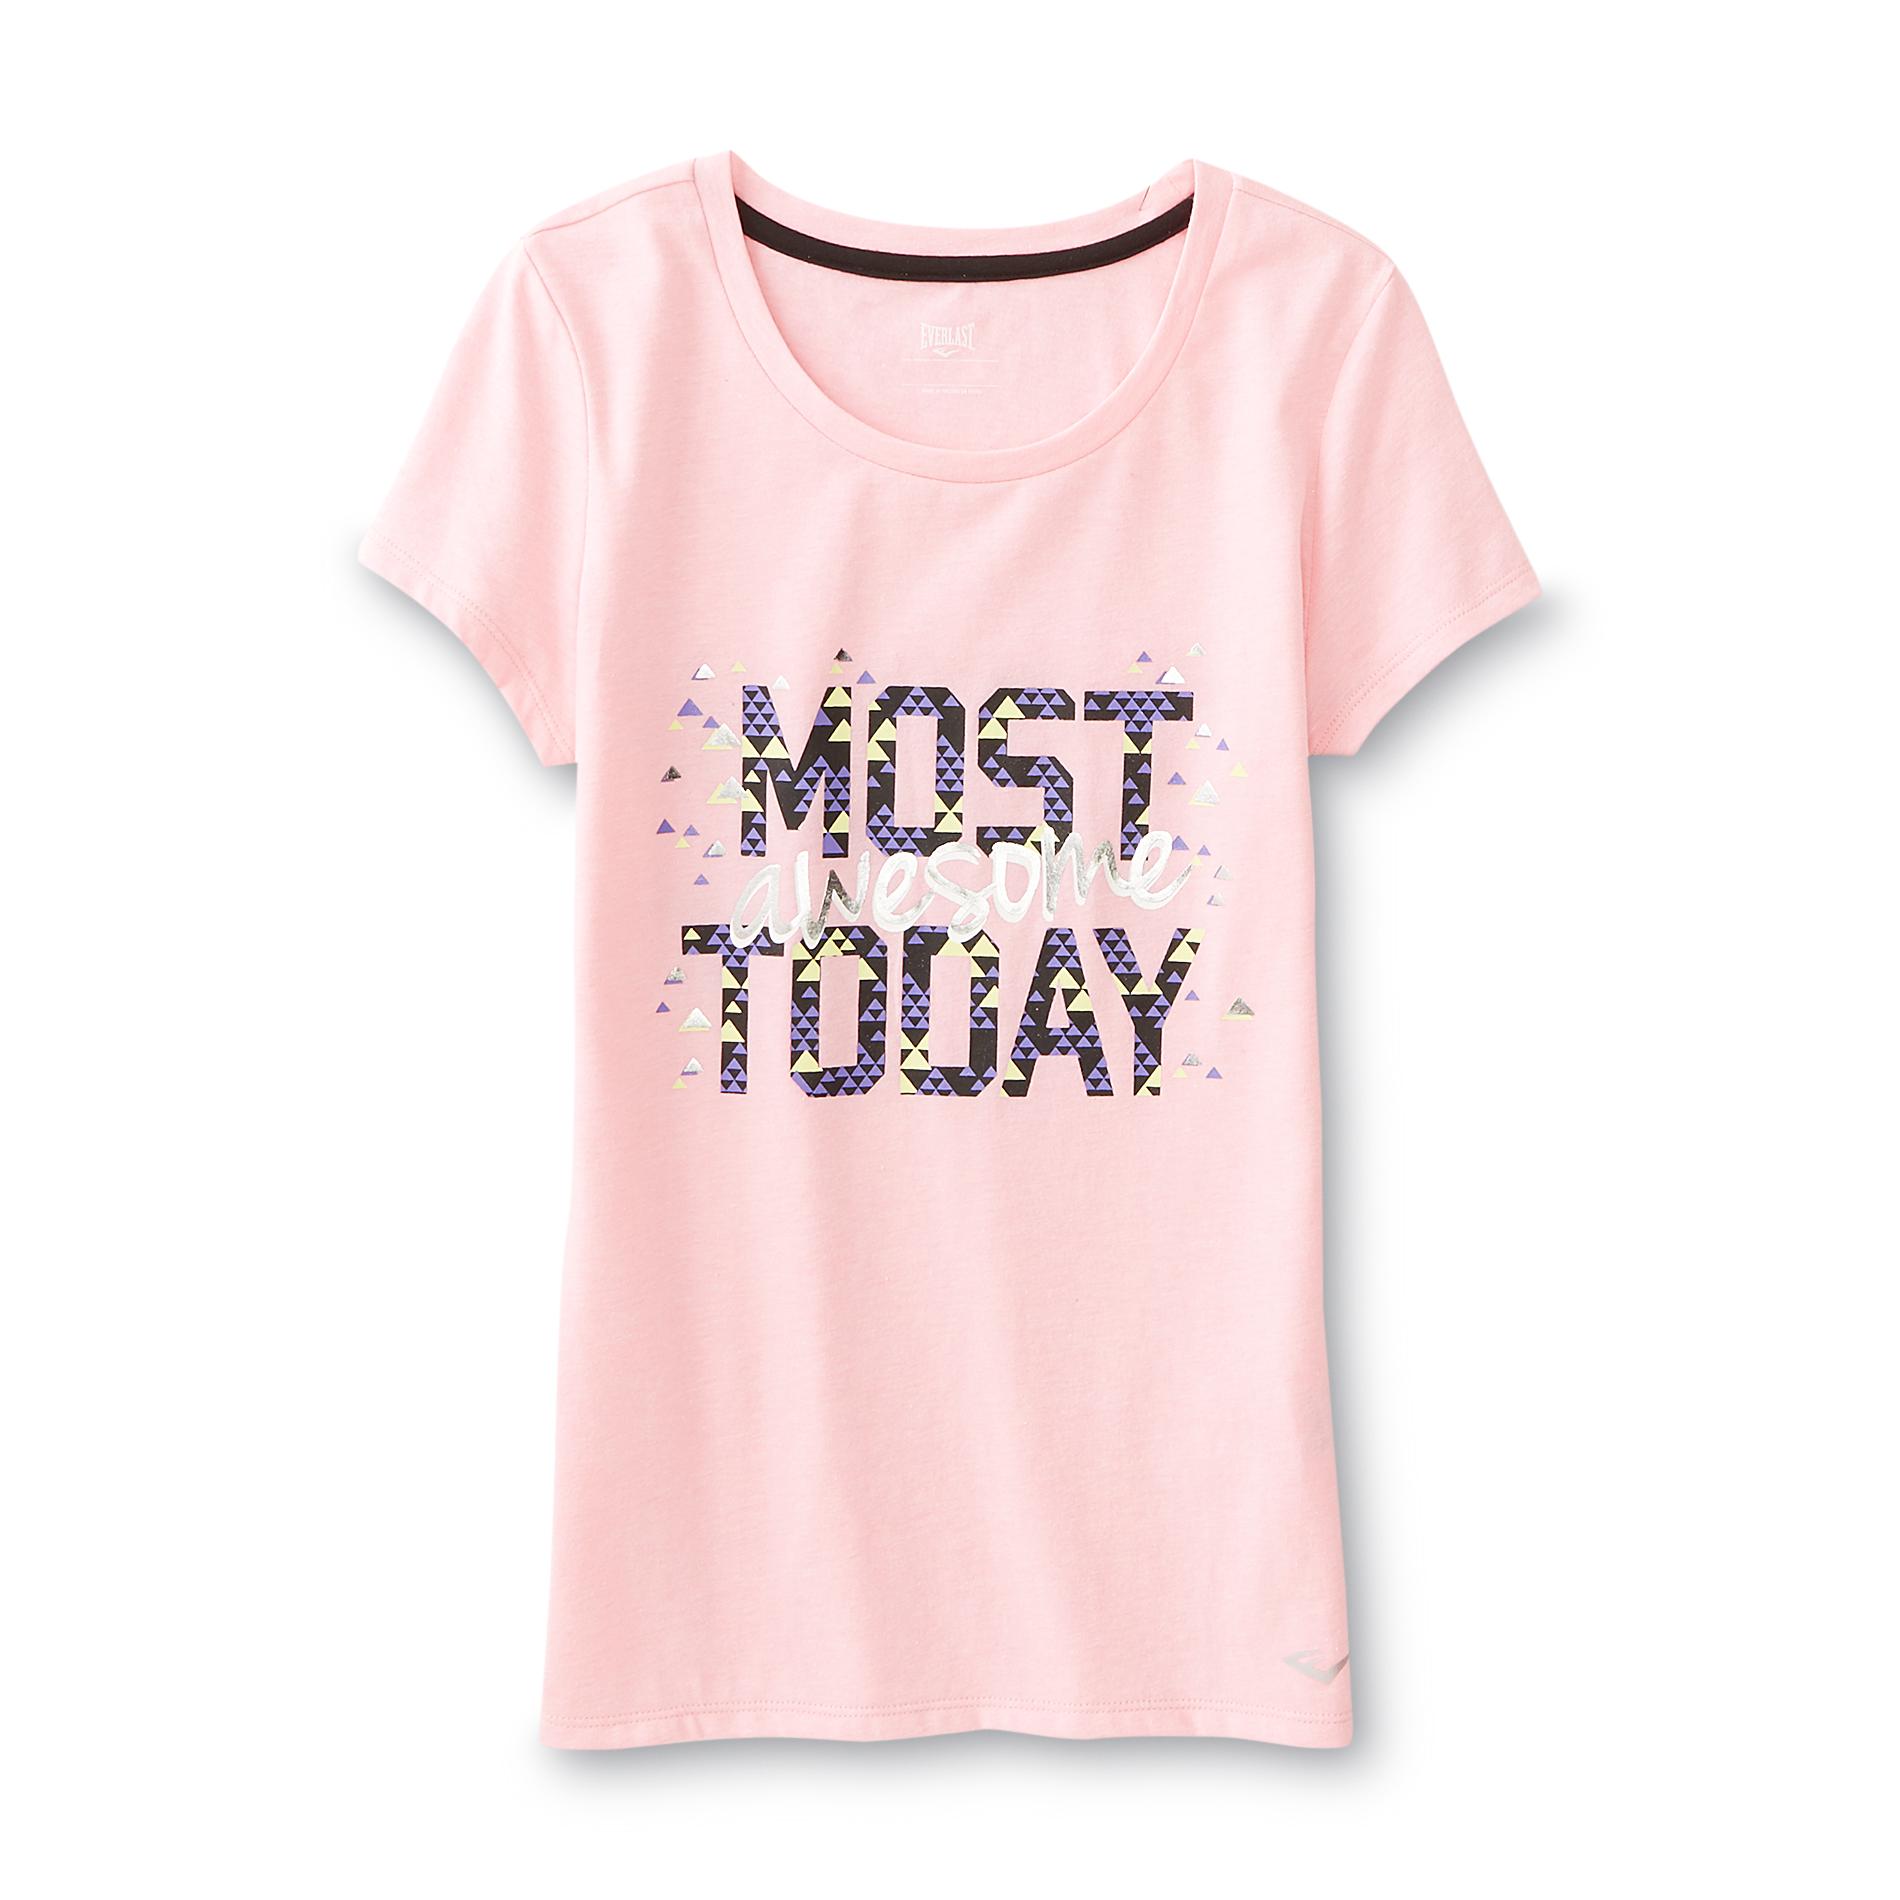 Everlast&reg; Girl's Athletic Top - Most Awesome Today